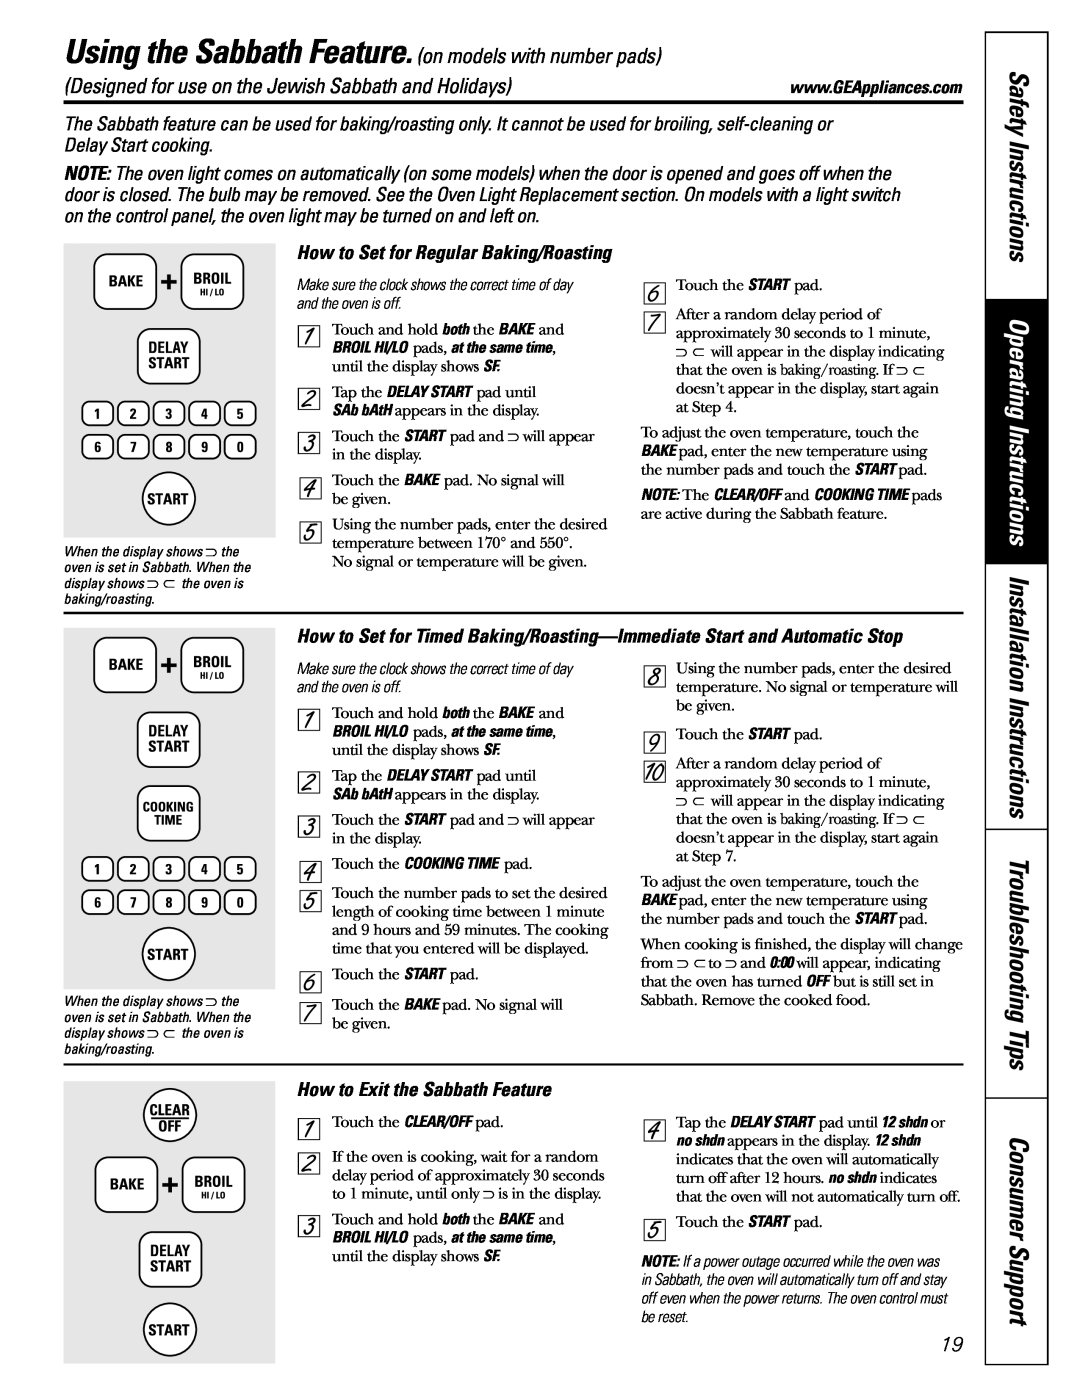 GE JGBP36 Operating Instructions, Instructions Troubleshooting Tips, Using the Sabbath Feature. on models with number pads 